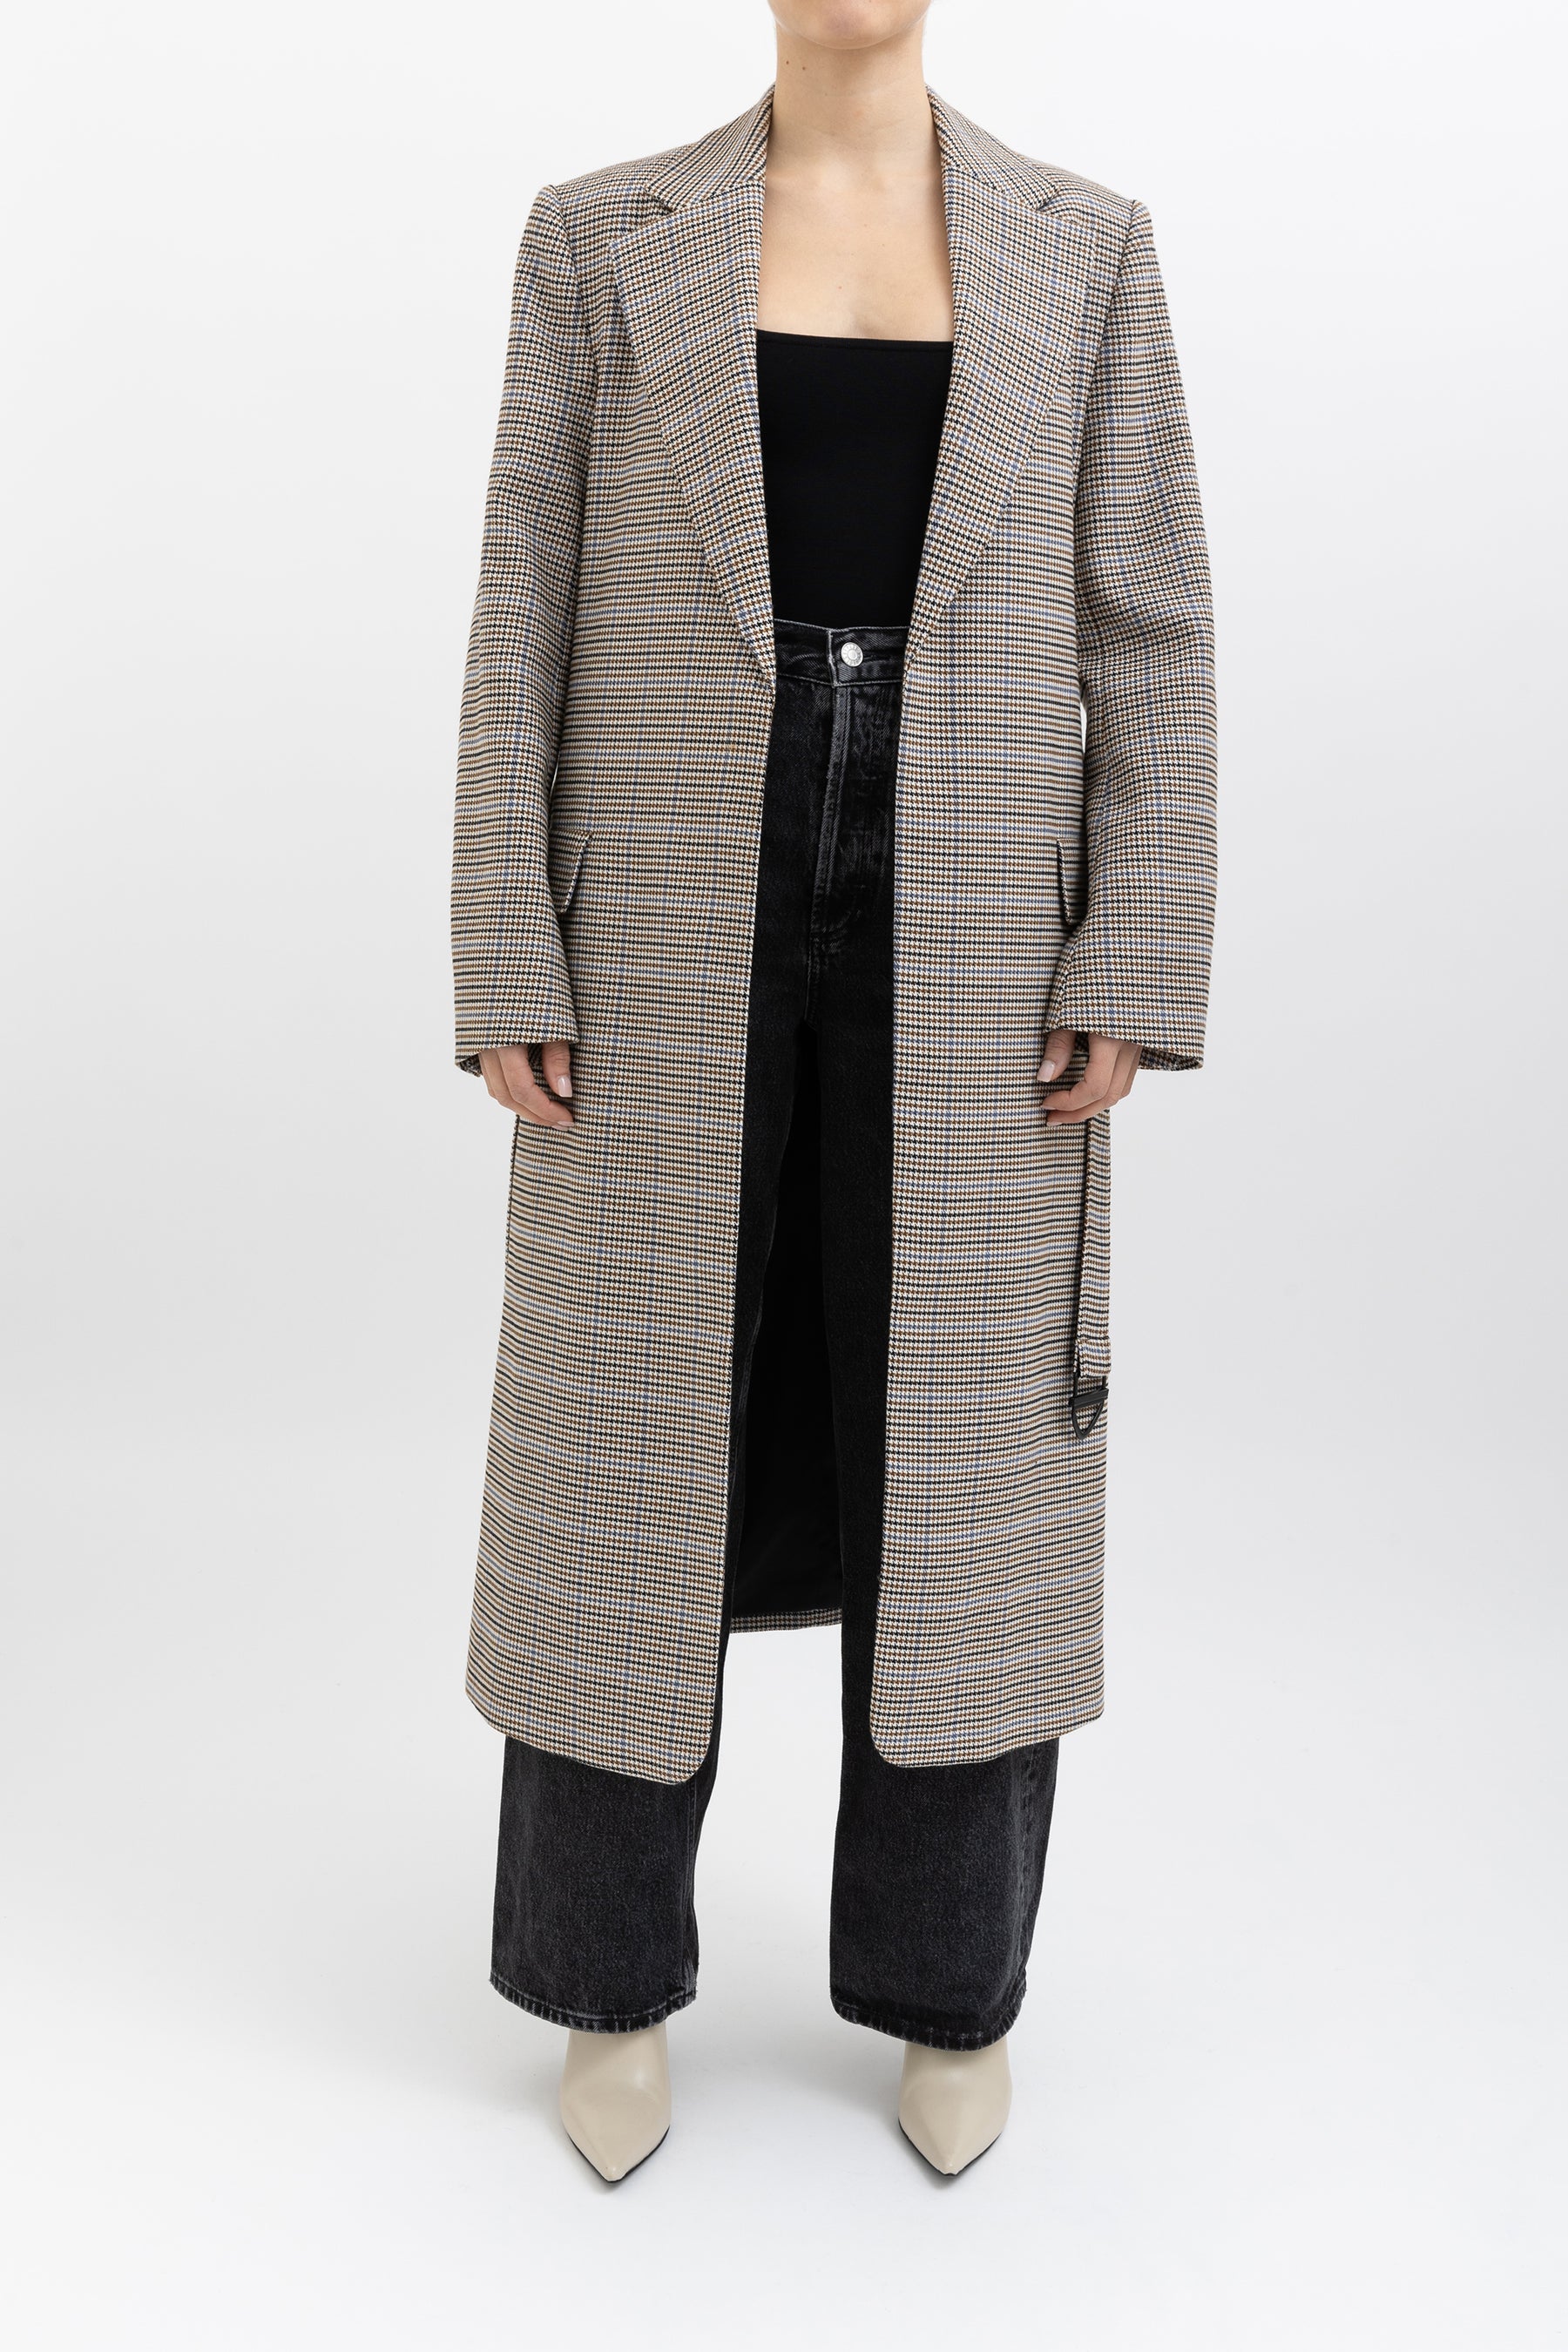 camilla-and-marc-black-and-brown-houndstooth-check-coat-with-blue-detail-8-au-21b0